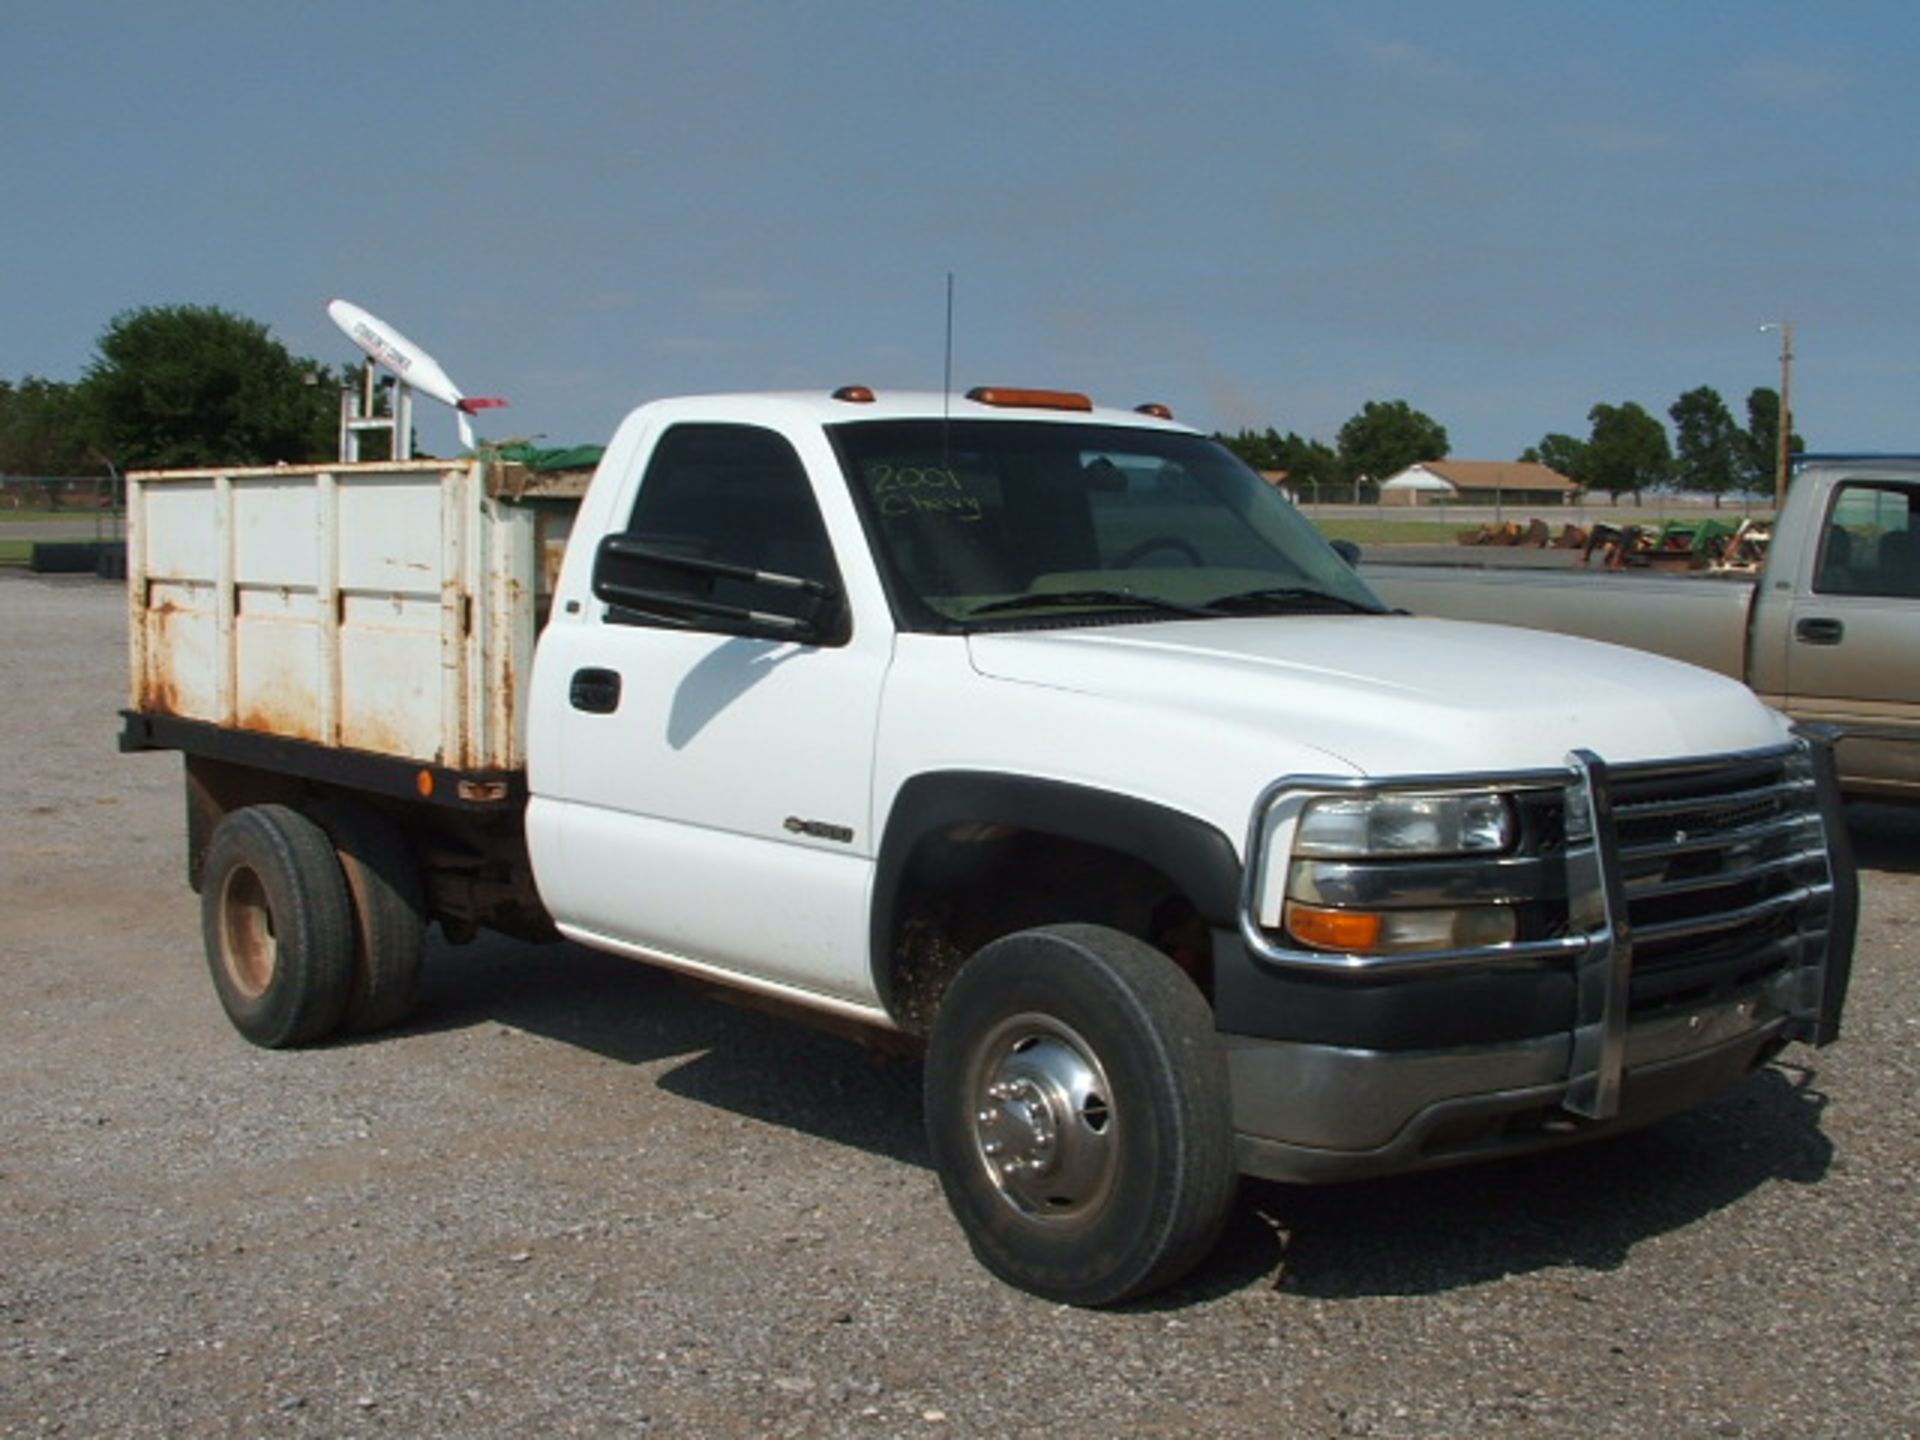 Lot 948 2001 Chevy 3500 Automatic w/Metal Grain Box - Image 2 of 6